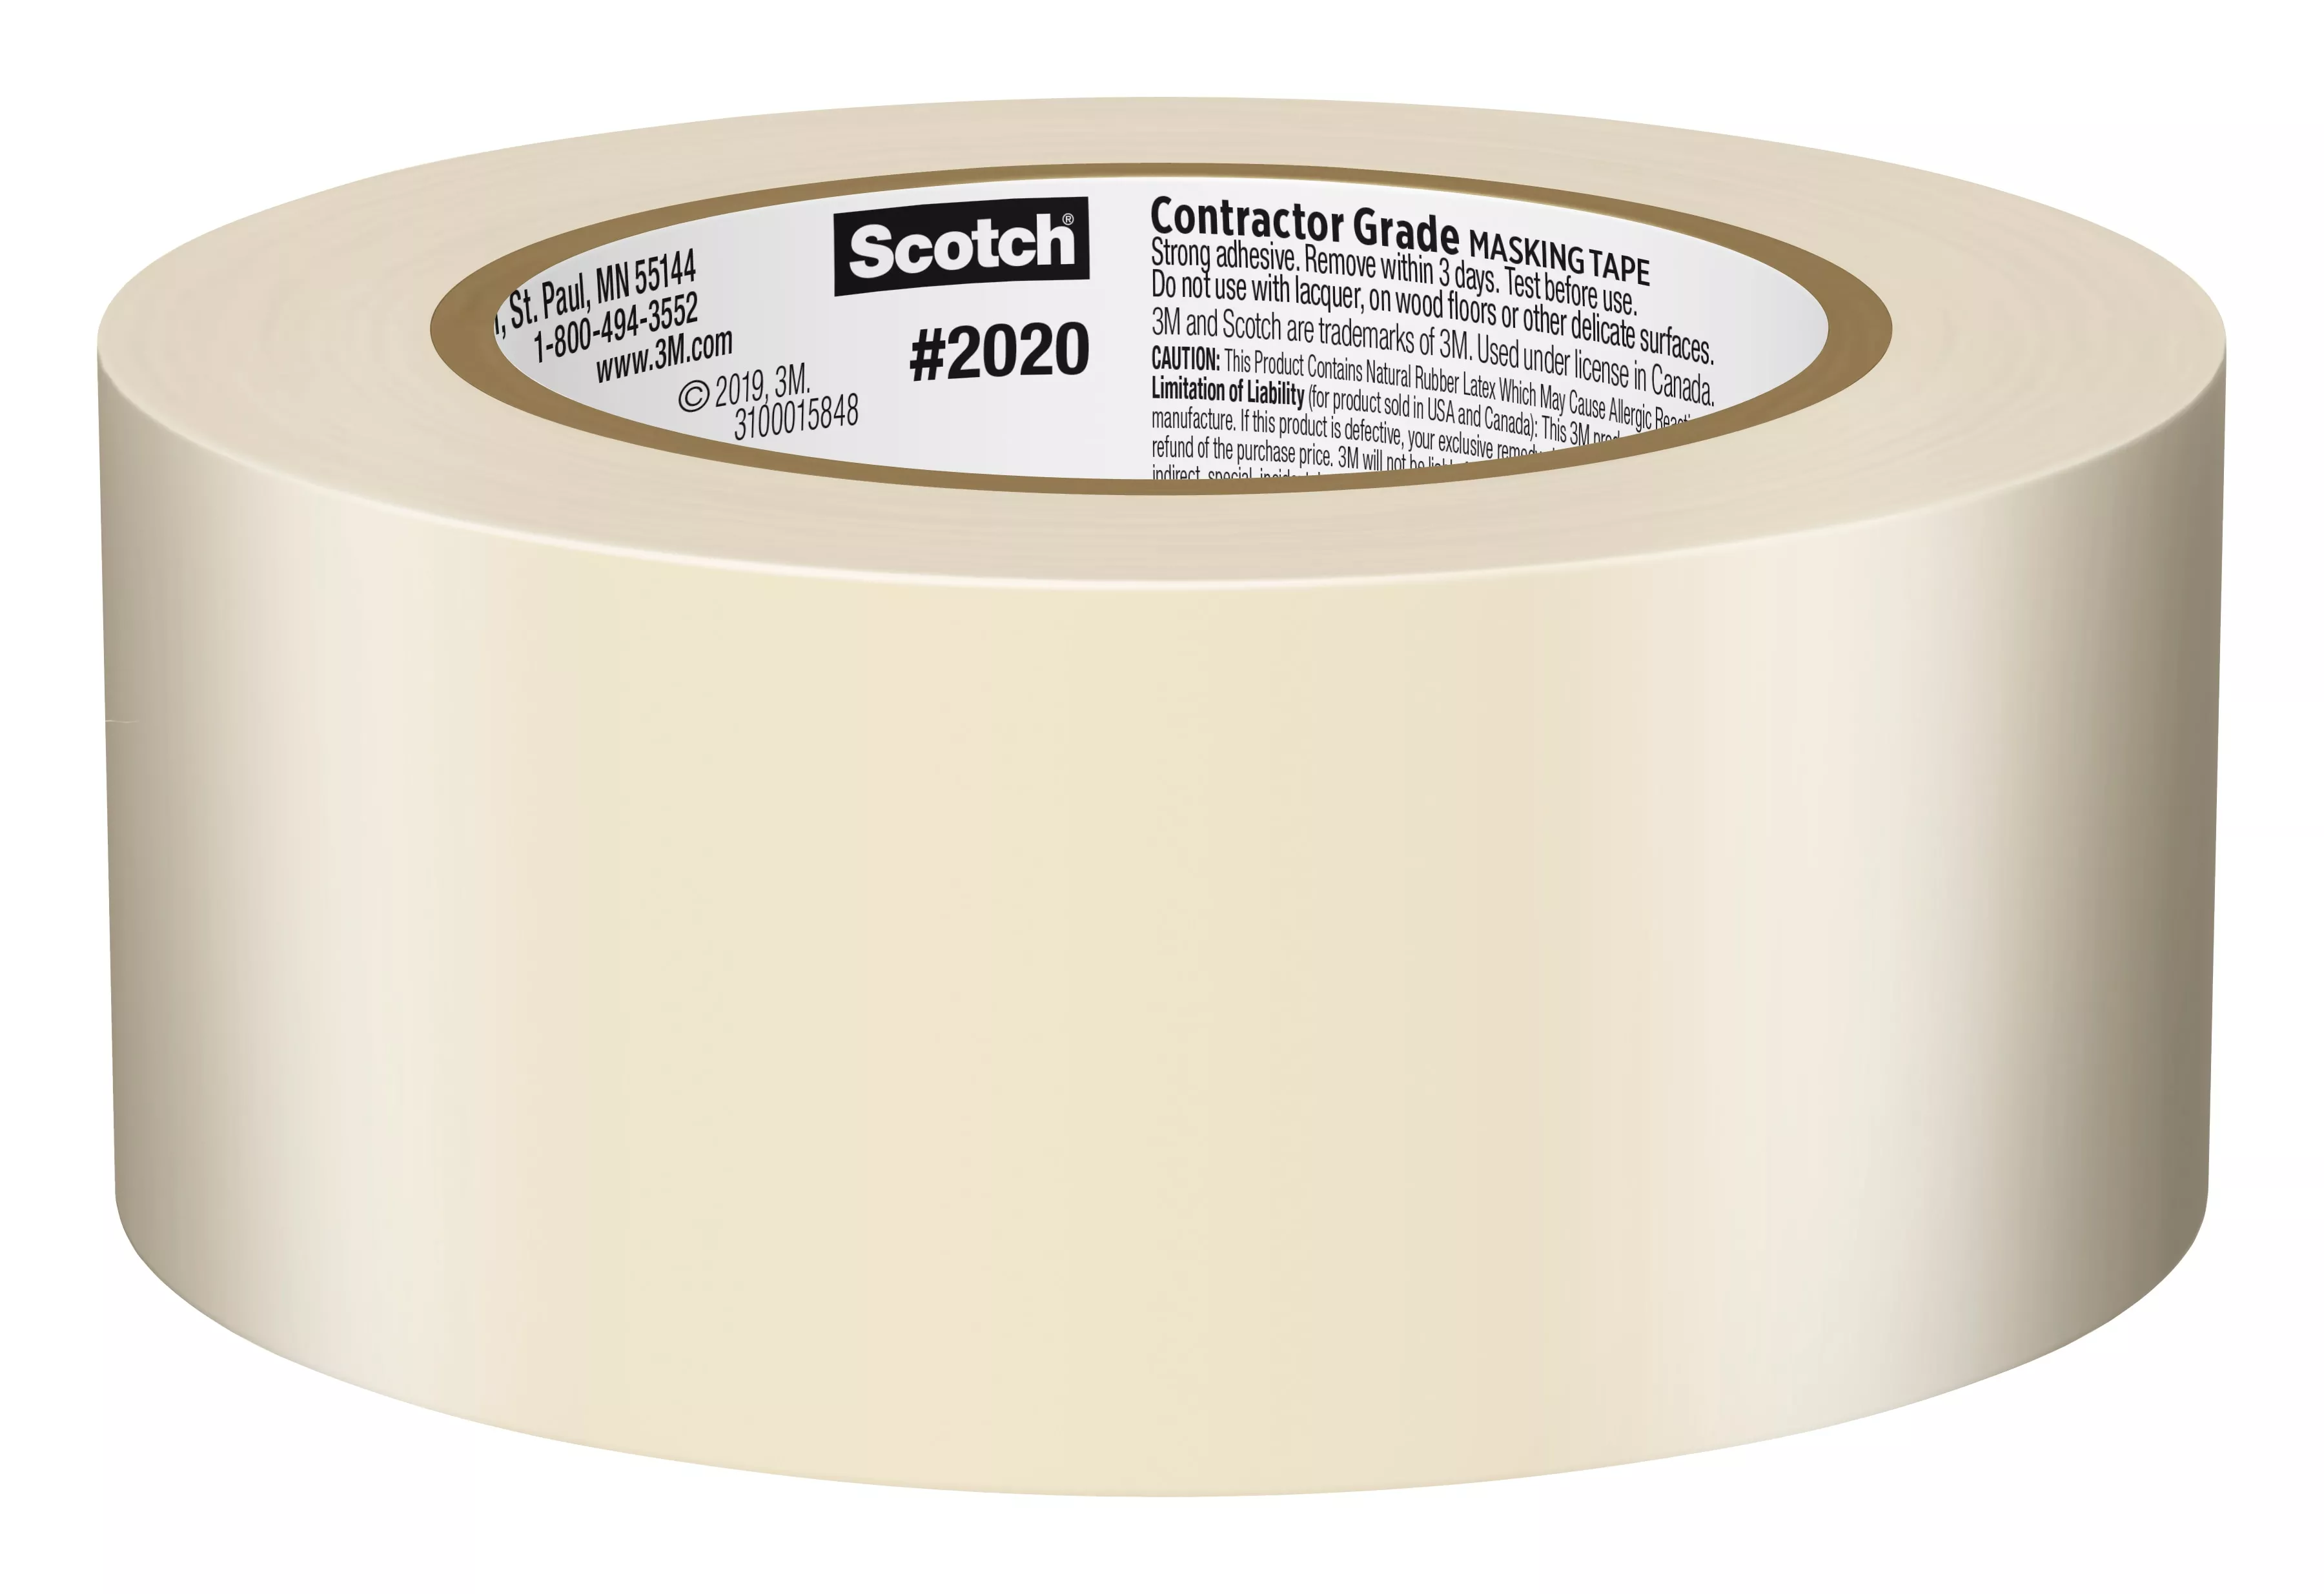 Product Number 2020 | Scotch® Contractor Grade Masking Tape 2020-48MP